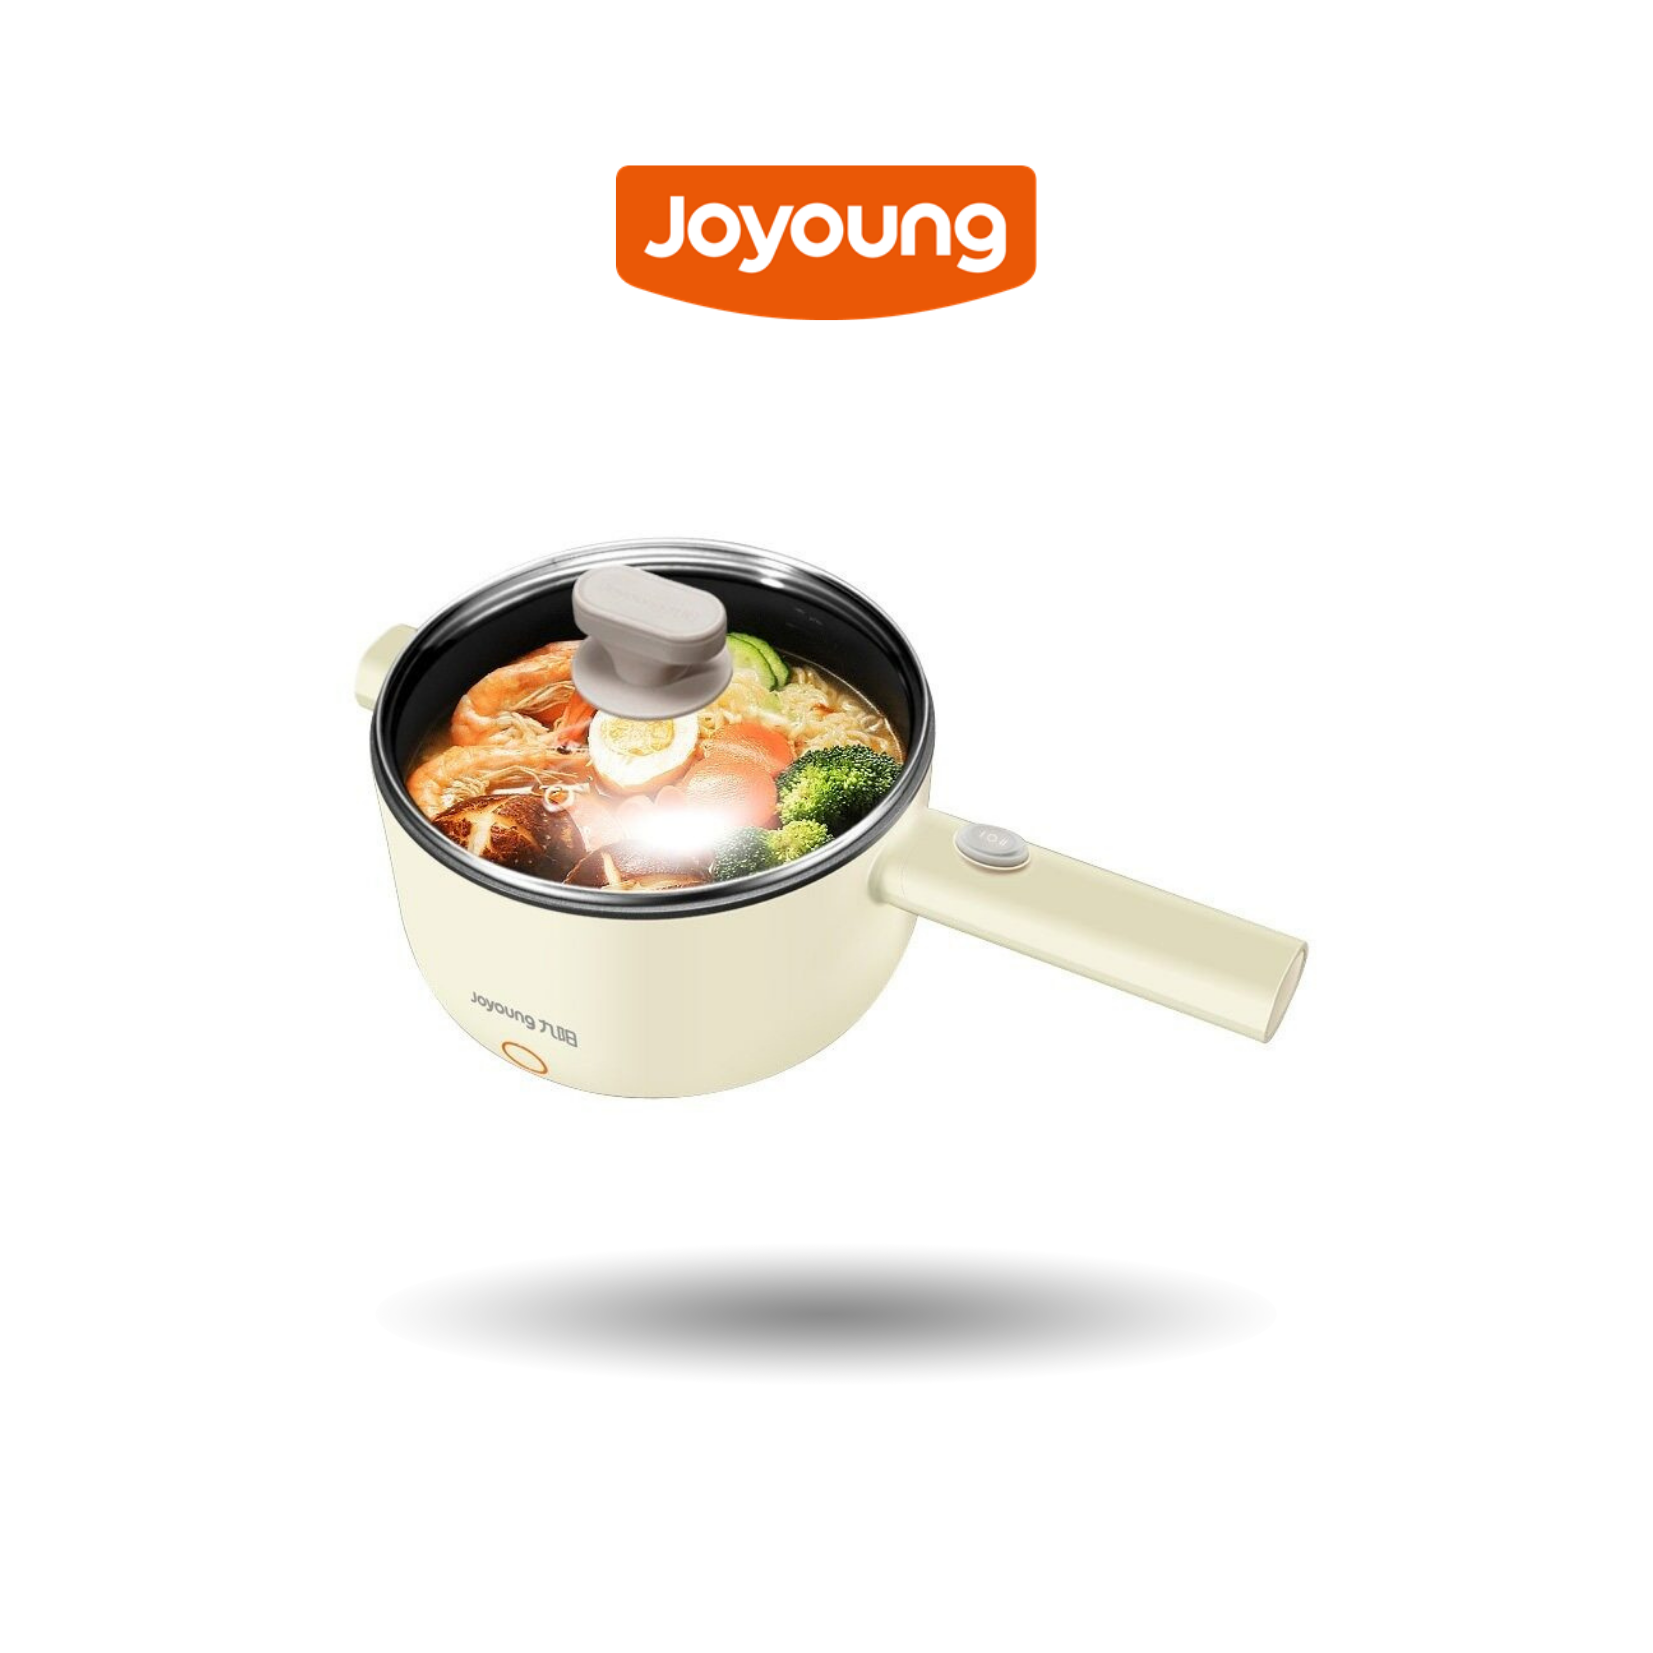 Joyoung Multifunctional Electric Pot | Non-Stick Coating | 1.5L Capacity | 2 Speed Fire Power